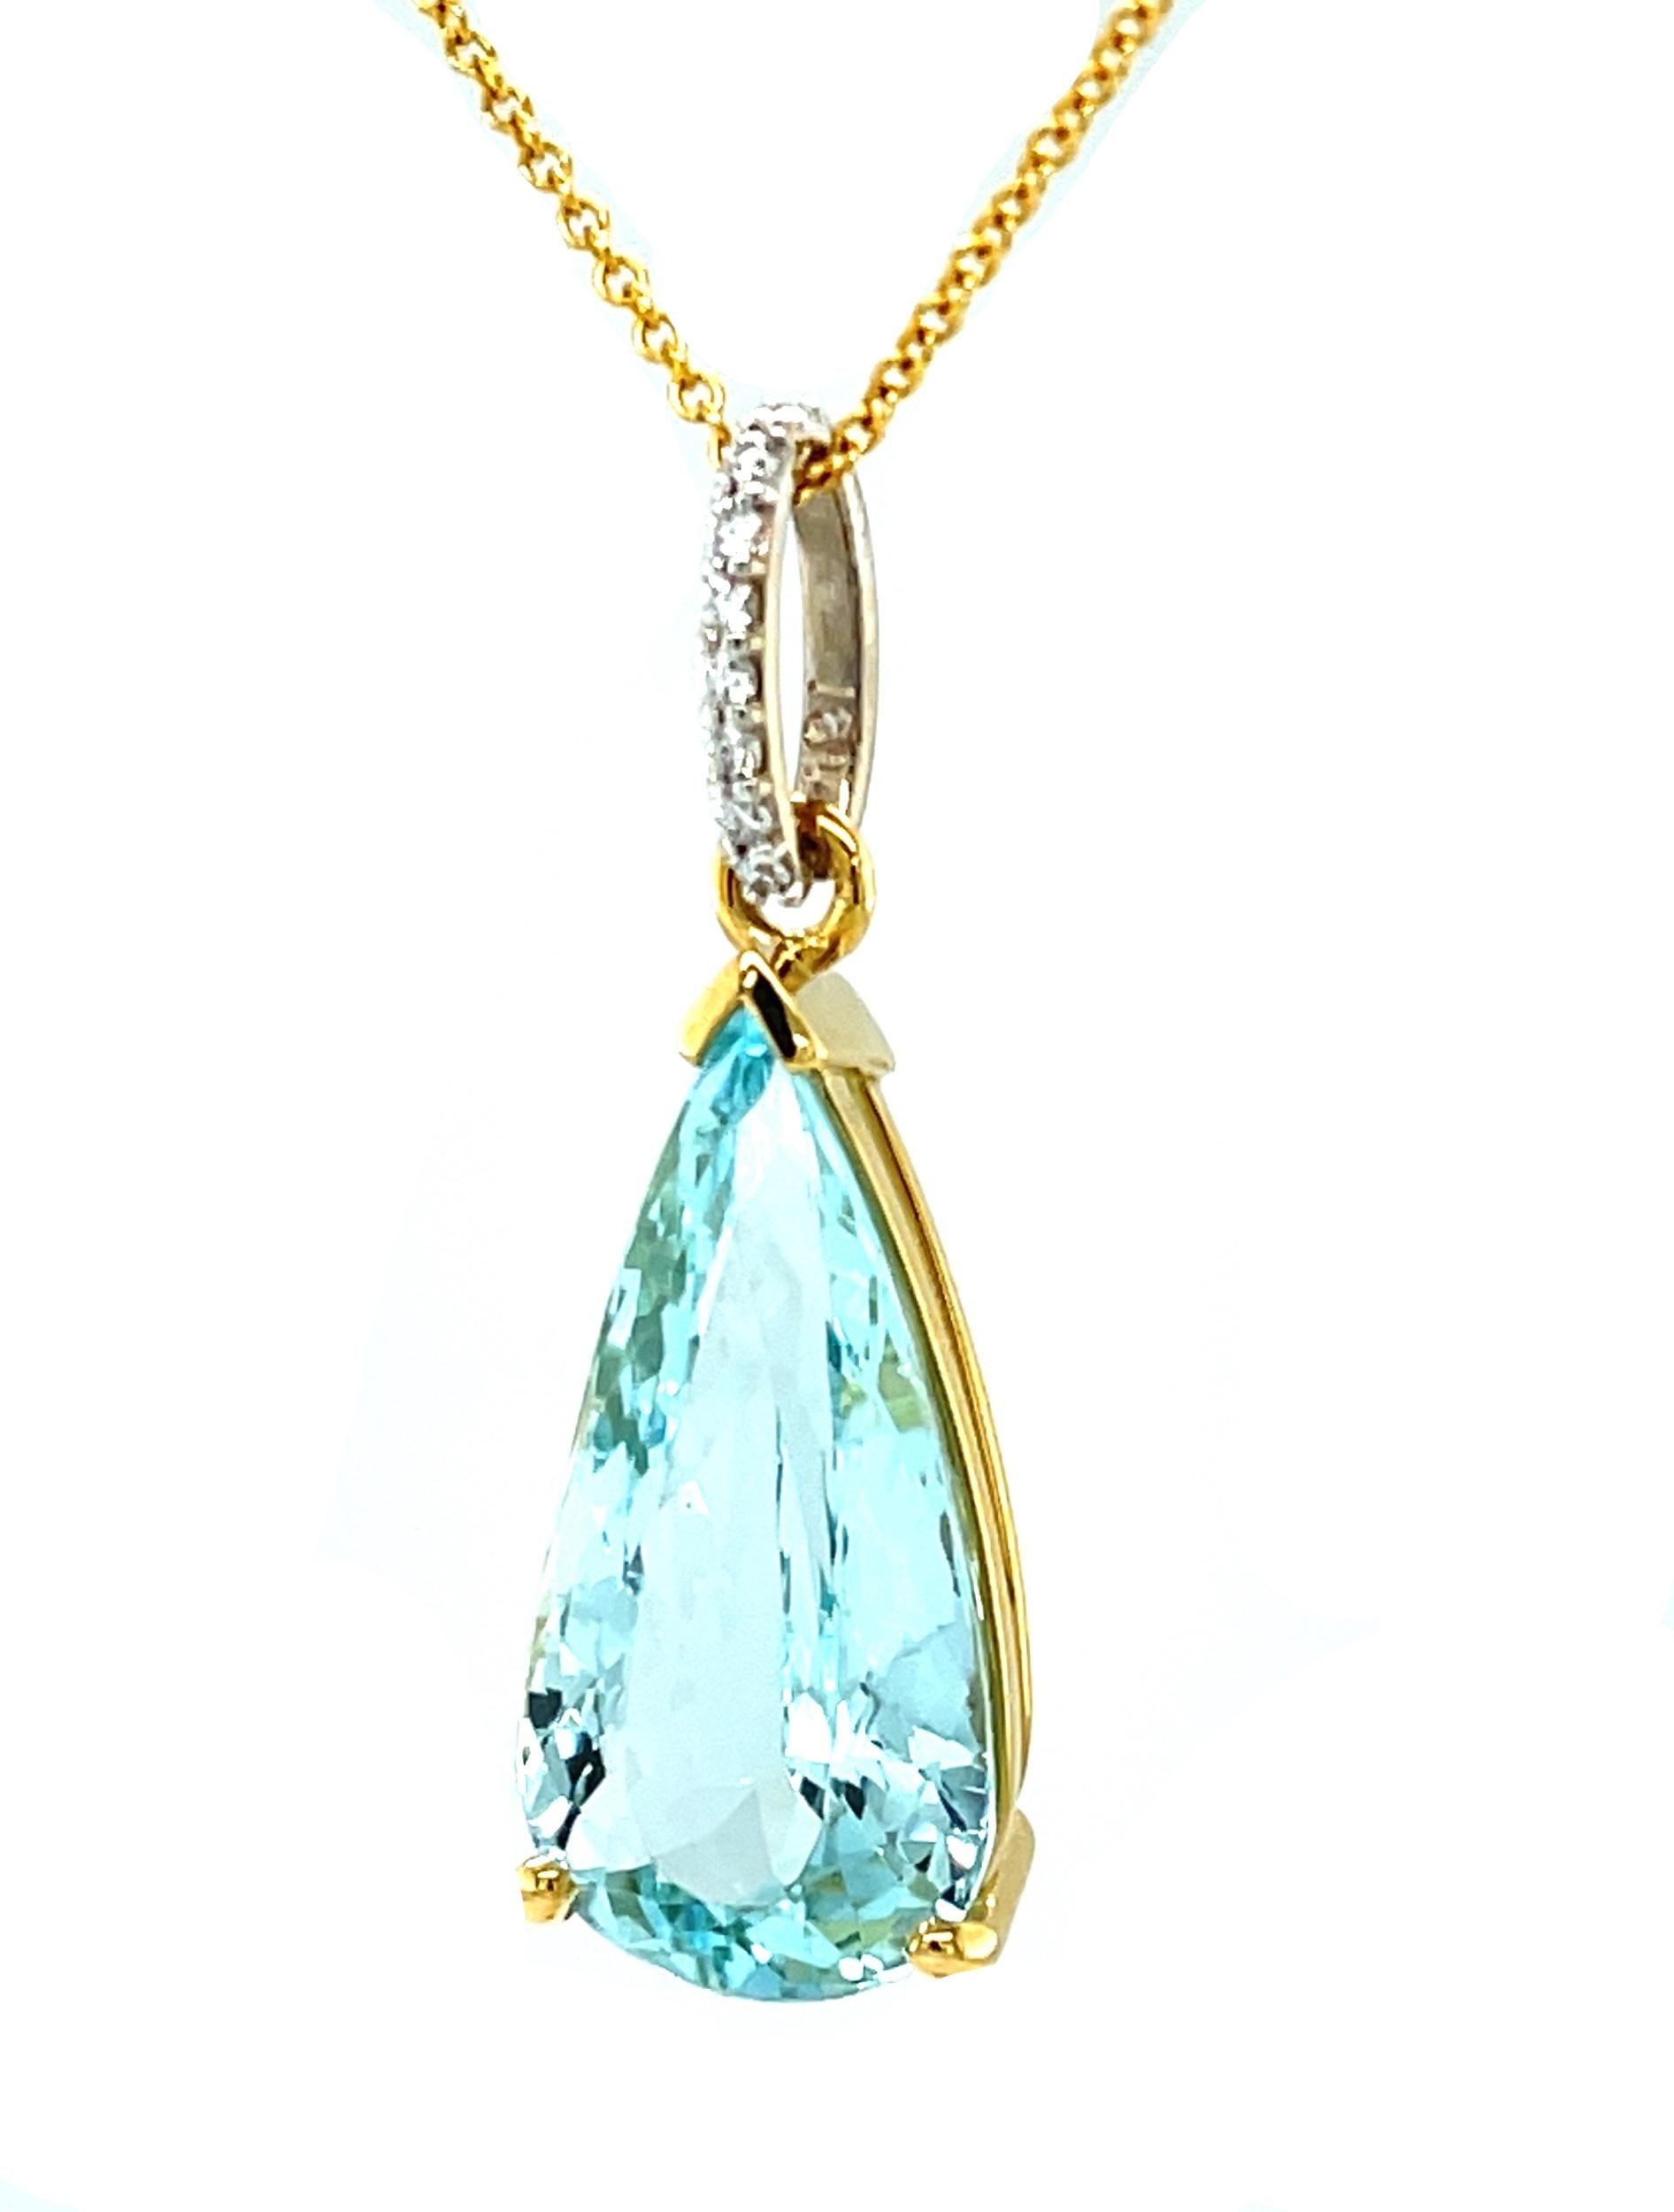 This gorgeous aquamarine and diamond necklace features an impressive 7.07 carat pear-shaped aquamarine set in 18k yellow gold. The aquamarine is a beautifully crystalline gem with bright blue color and exceptional brilliance. Accented with a